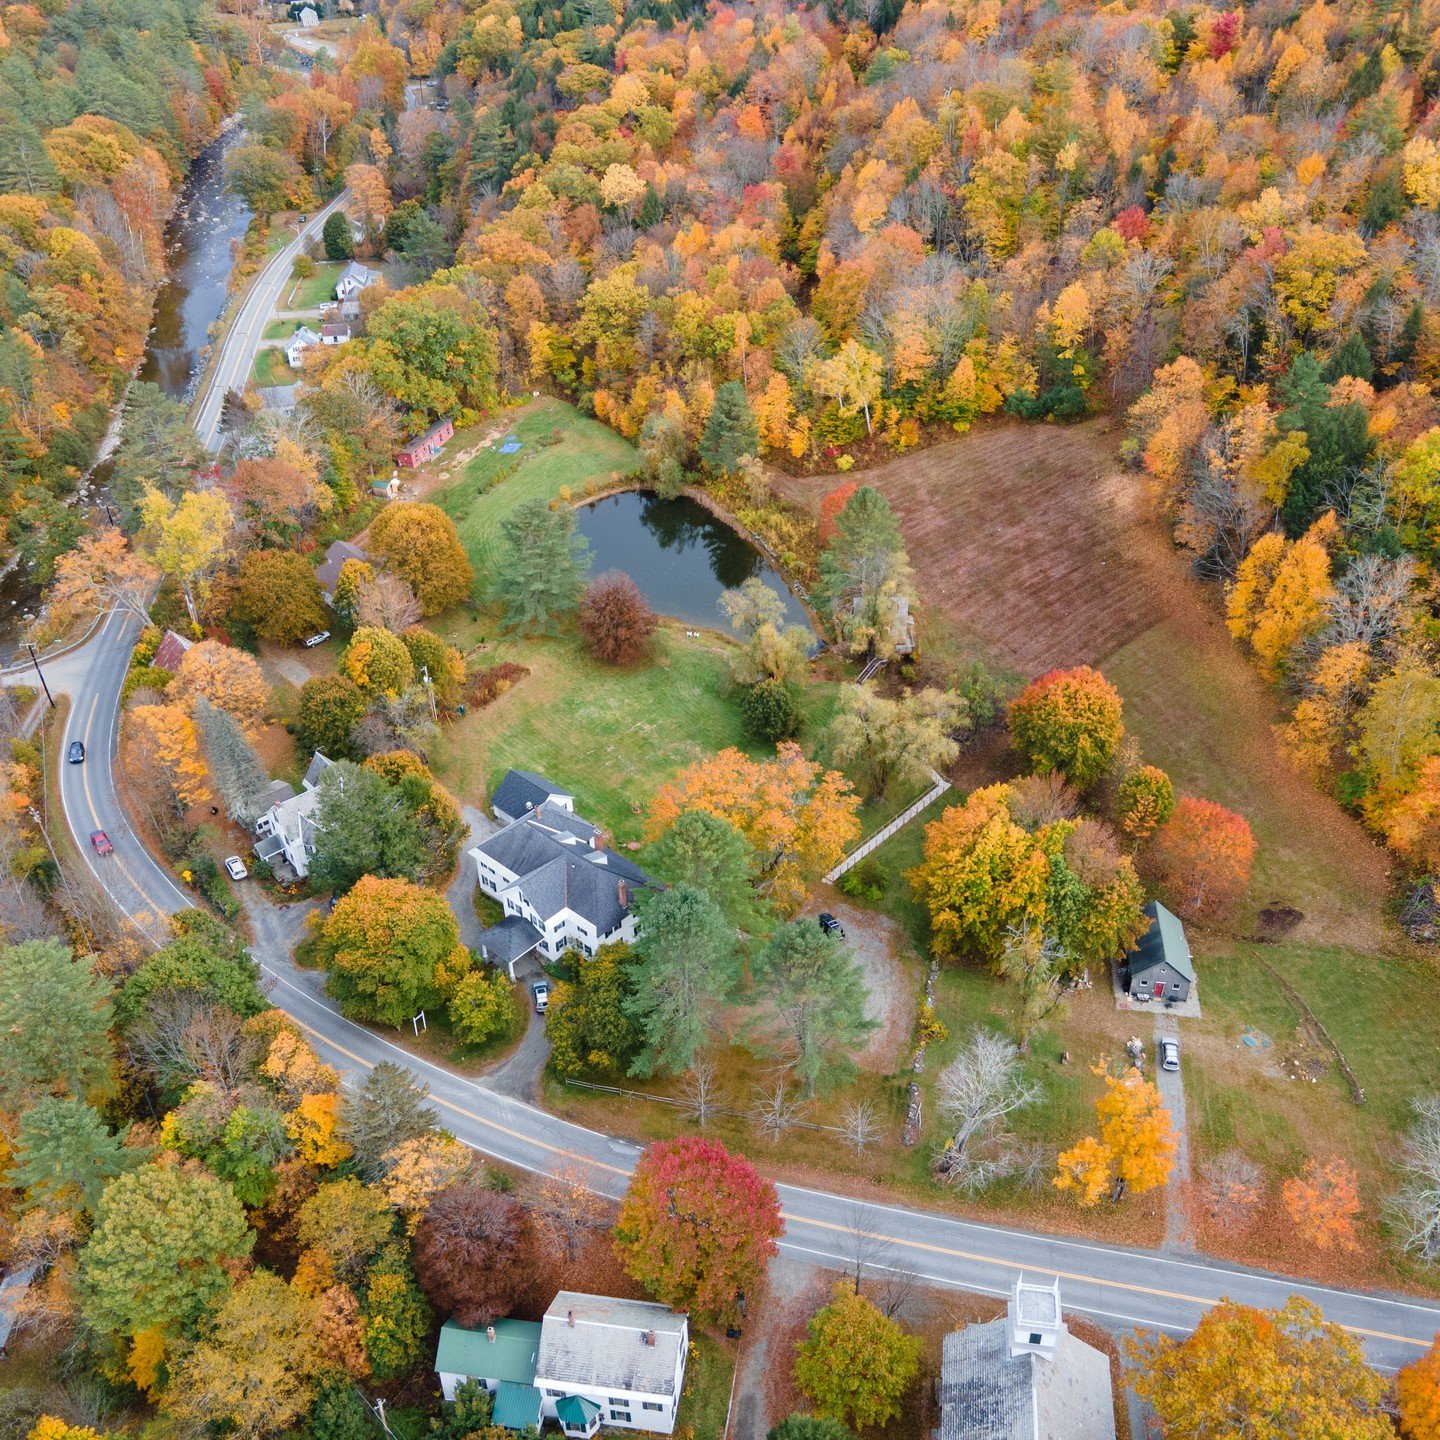 In honor of #earthday, heres an arial view of our little patch on the blue planet, blanketed in fall colors.

Thanks to @ryanzipp for the photo!

Happy Earth Day!